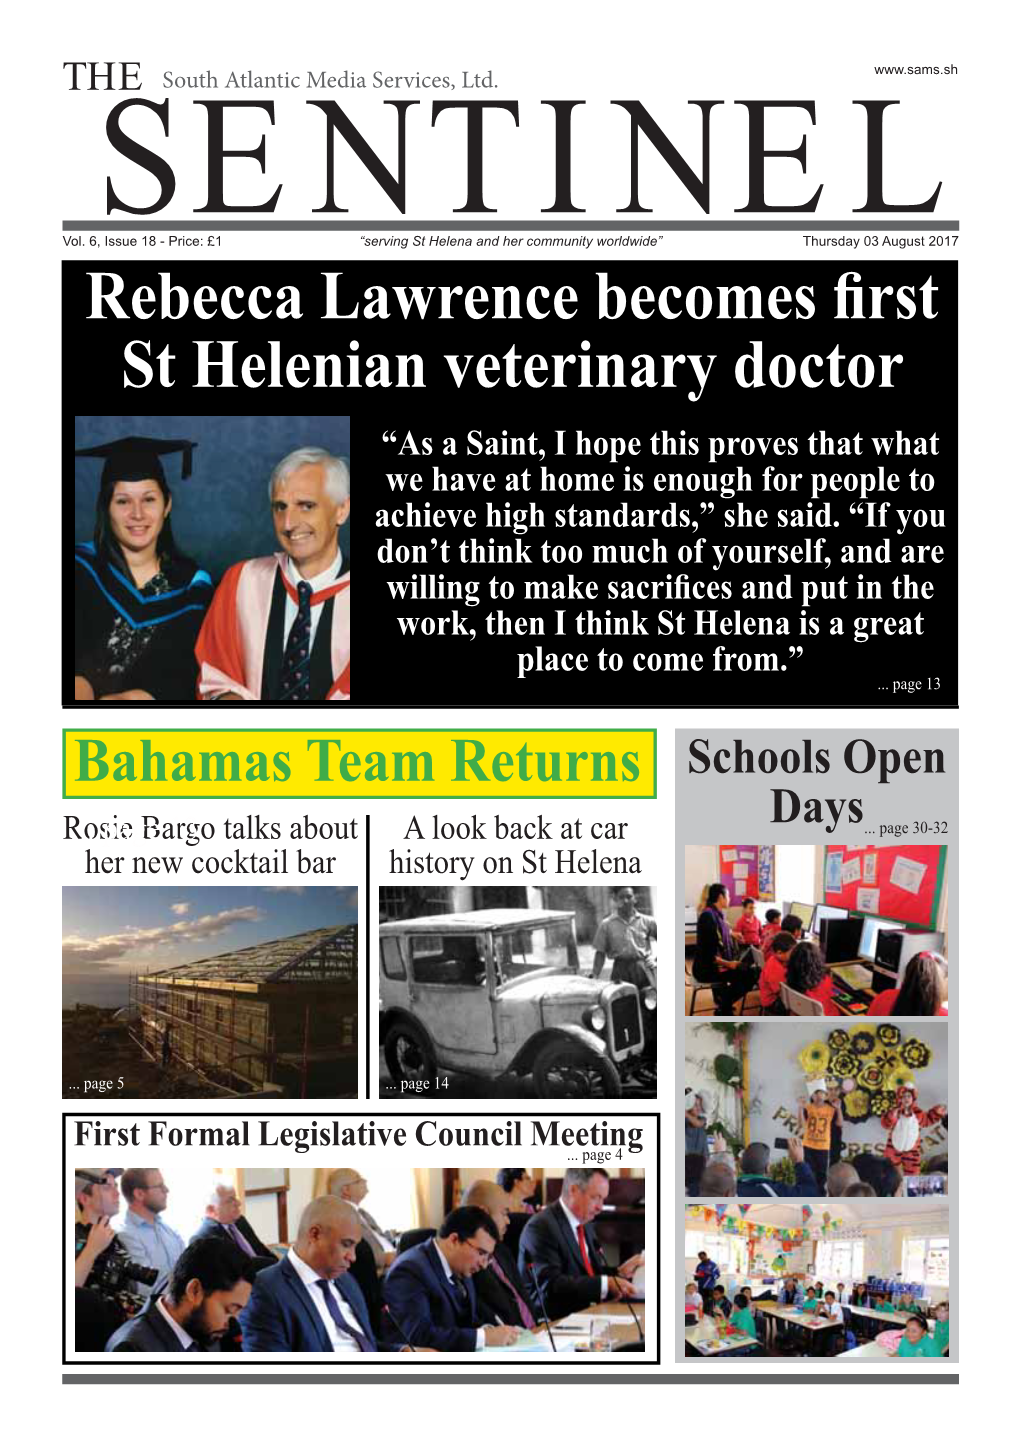 Rebecca Lawrence Becomes First St Helenian Veterinary Doctor